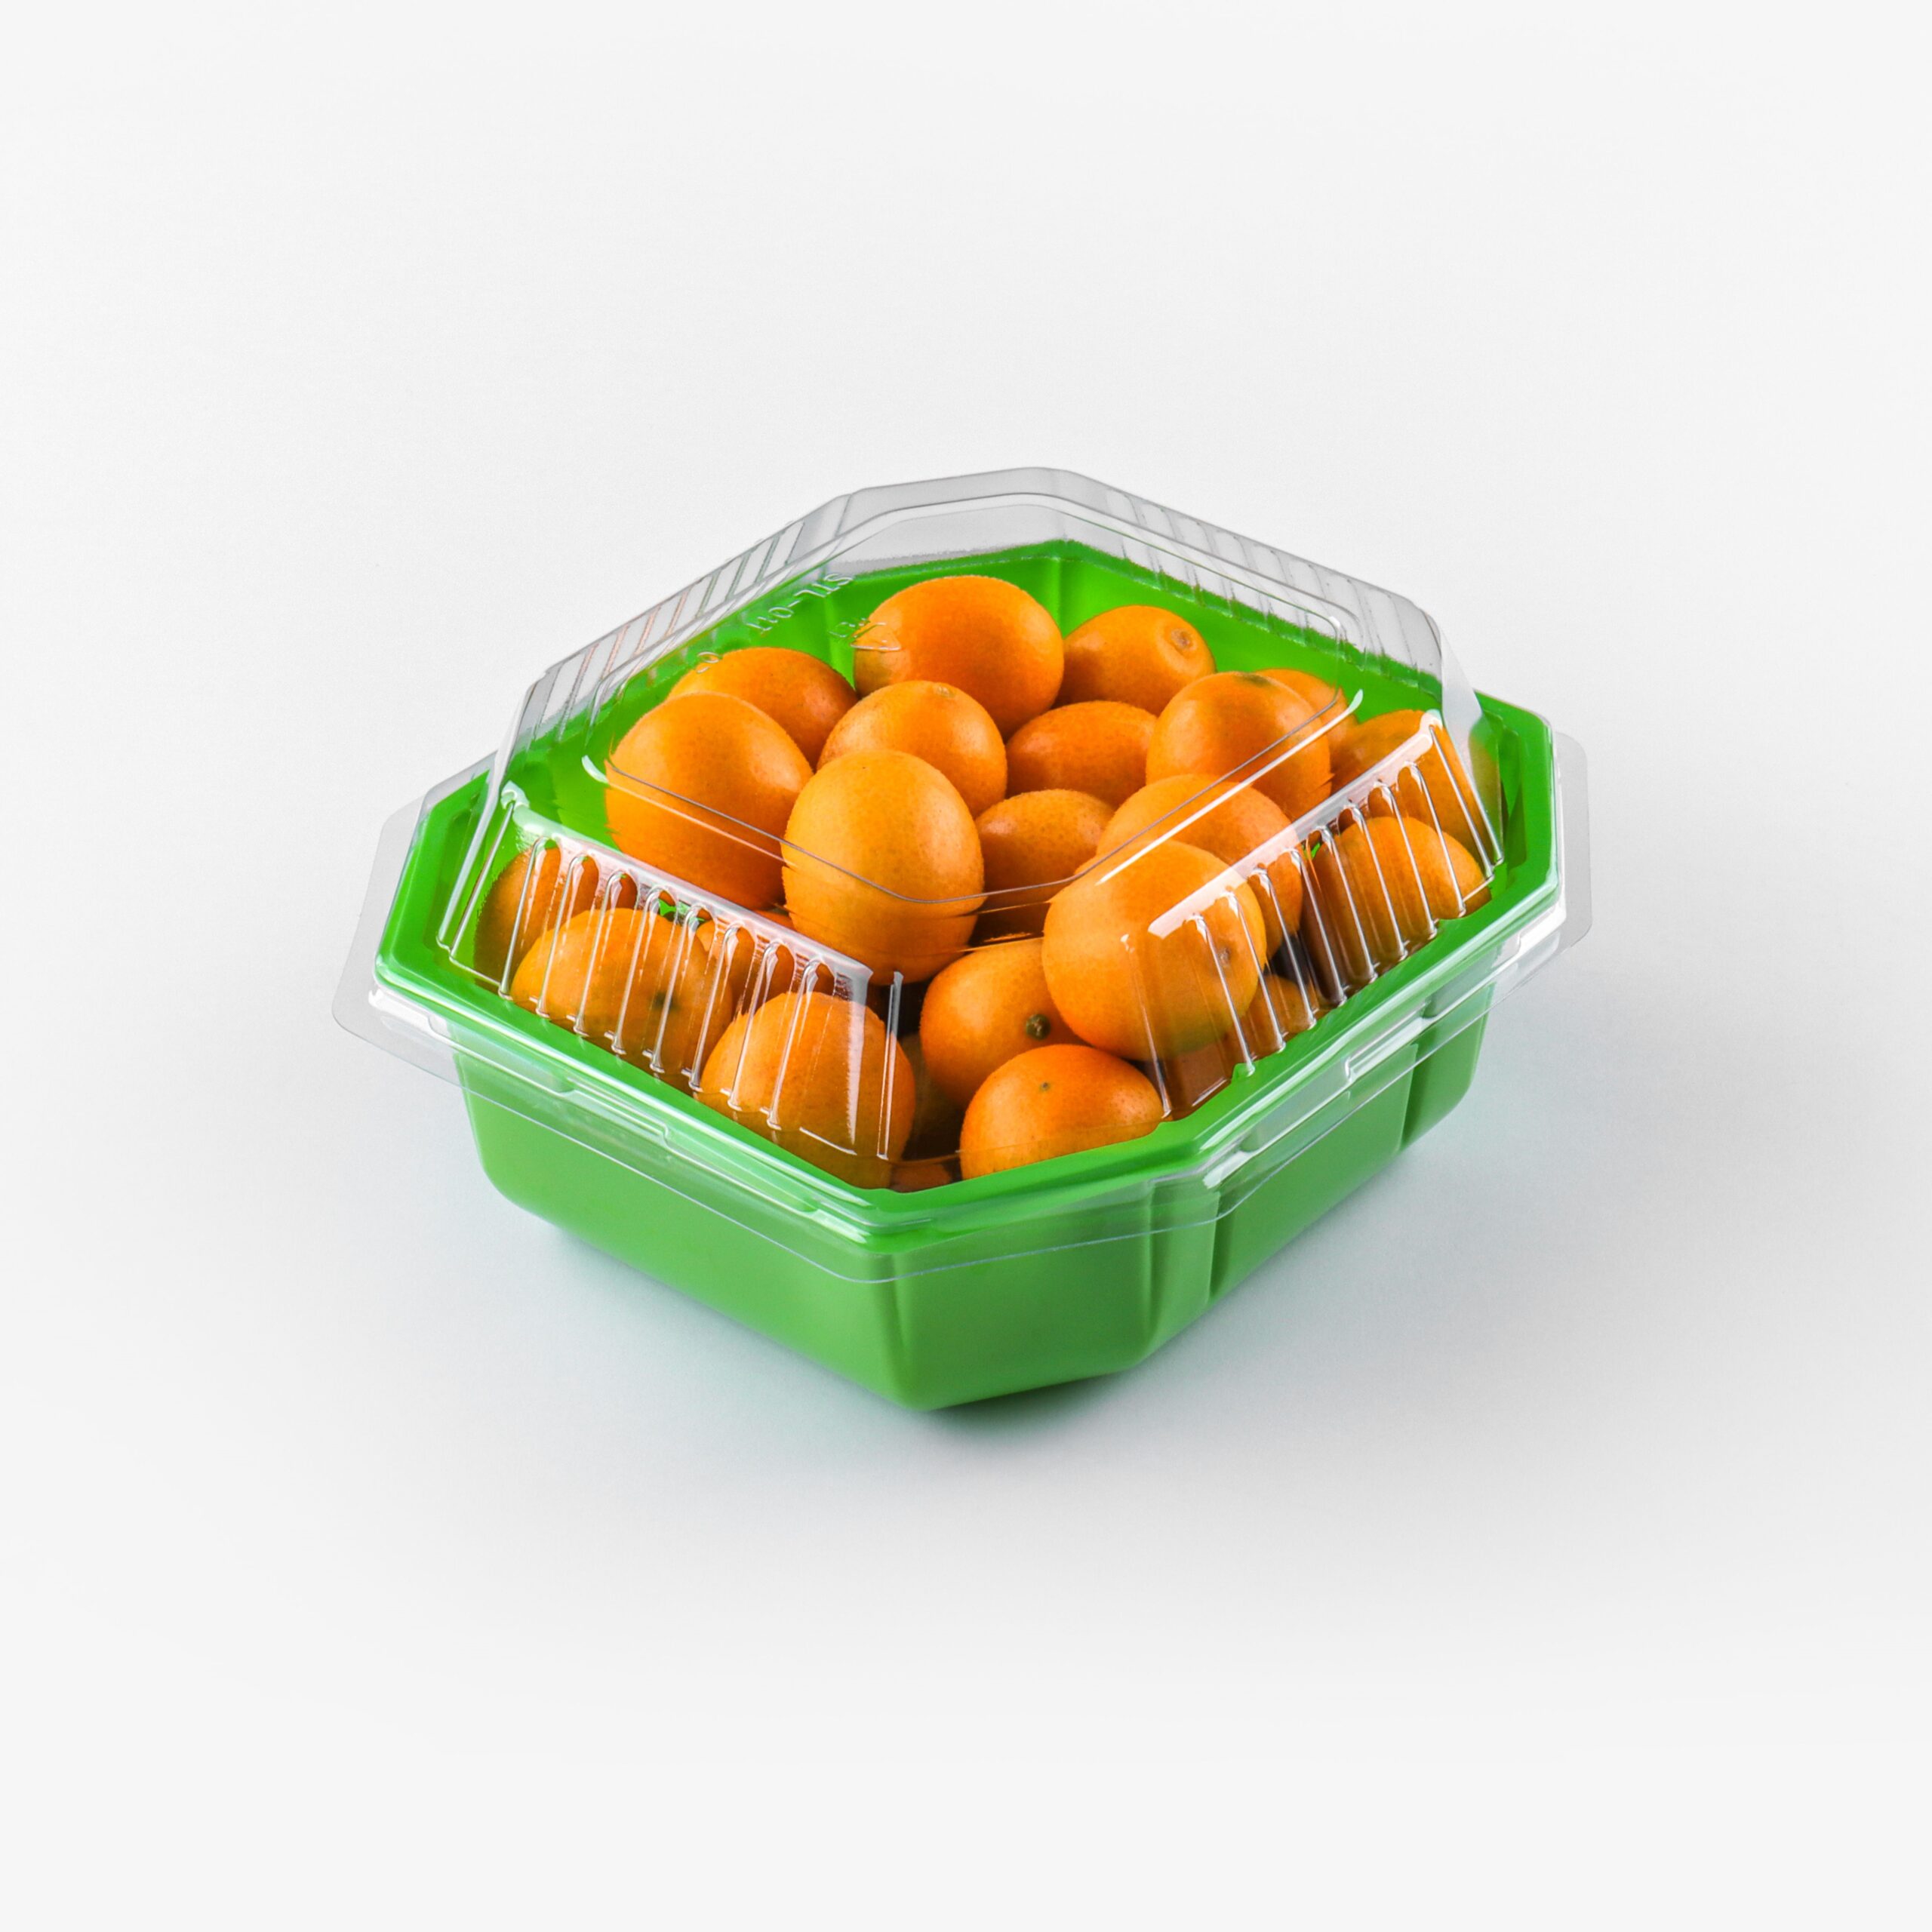 vegetable packing tray 01b